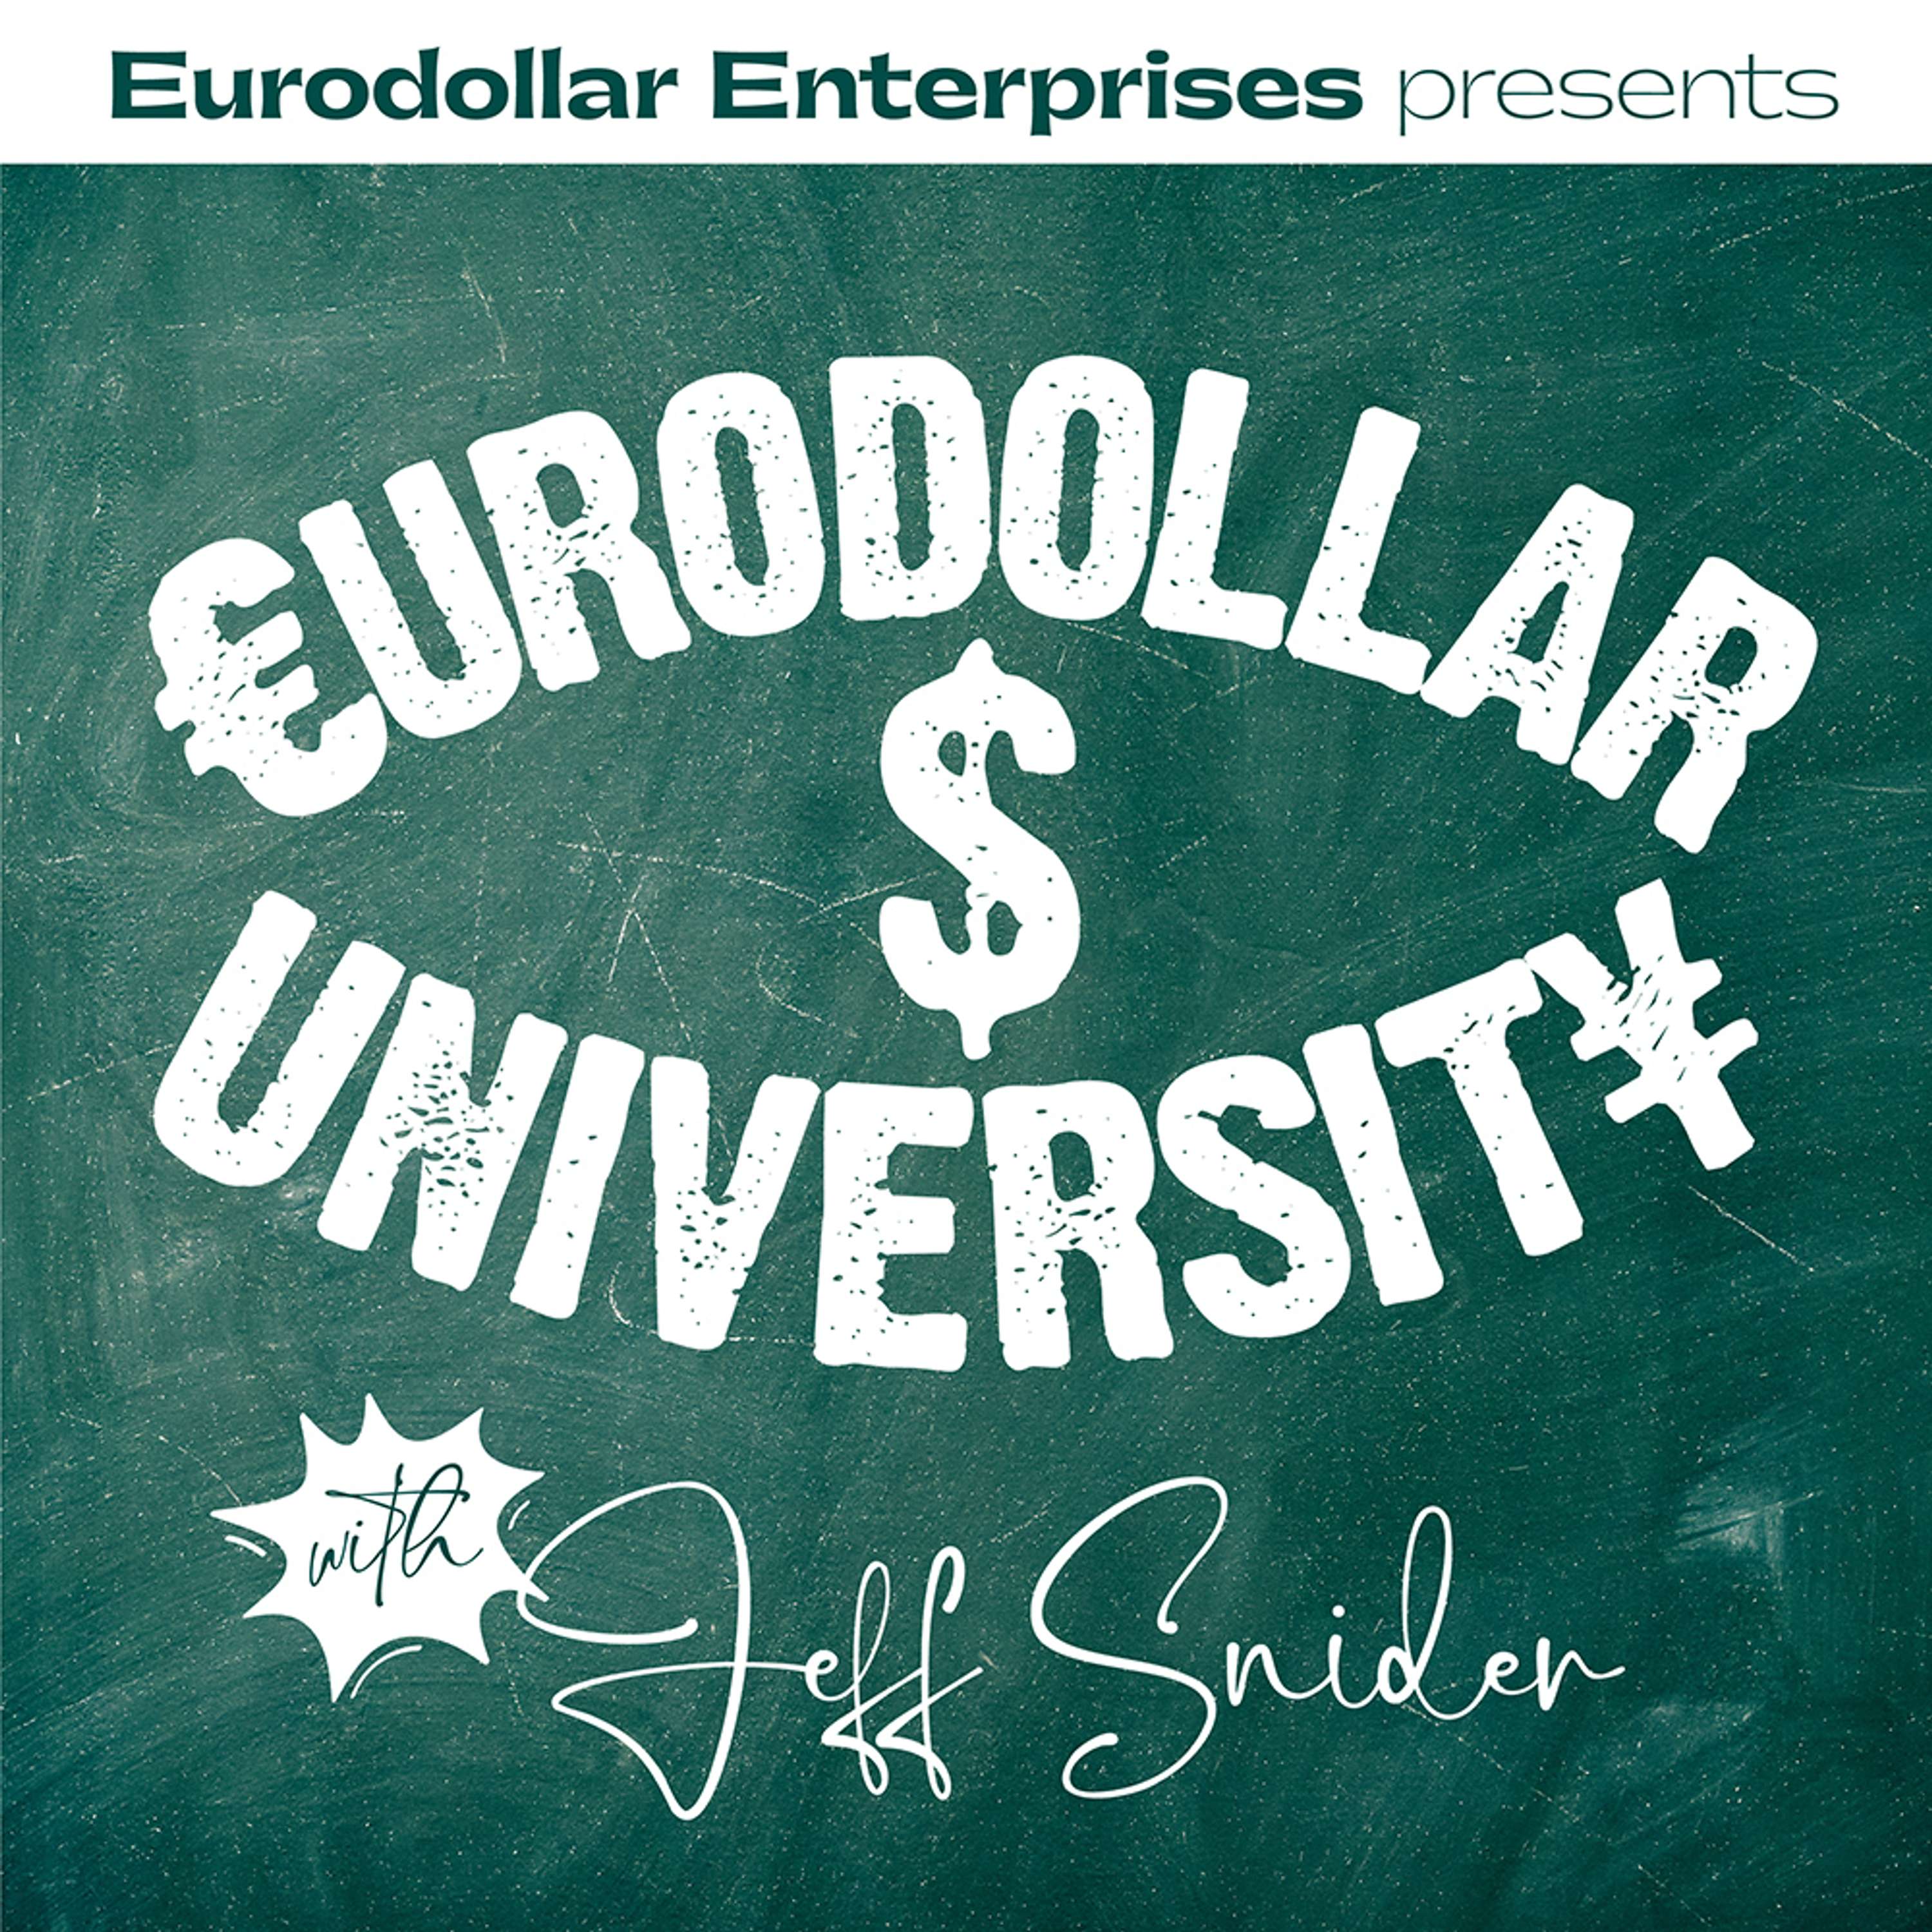 RECESSION WATCH: Income Stopped Growing in Oct. '21 [Eurodollar University, Ep. 213]